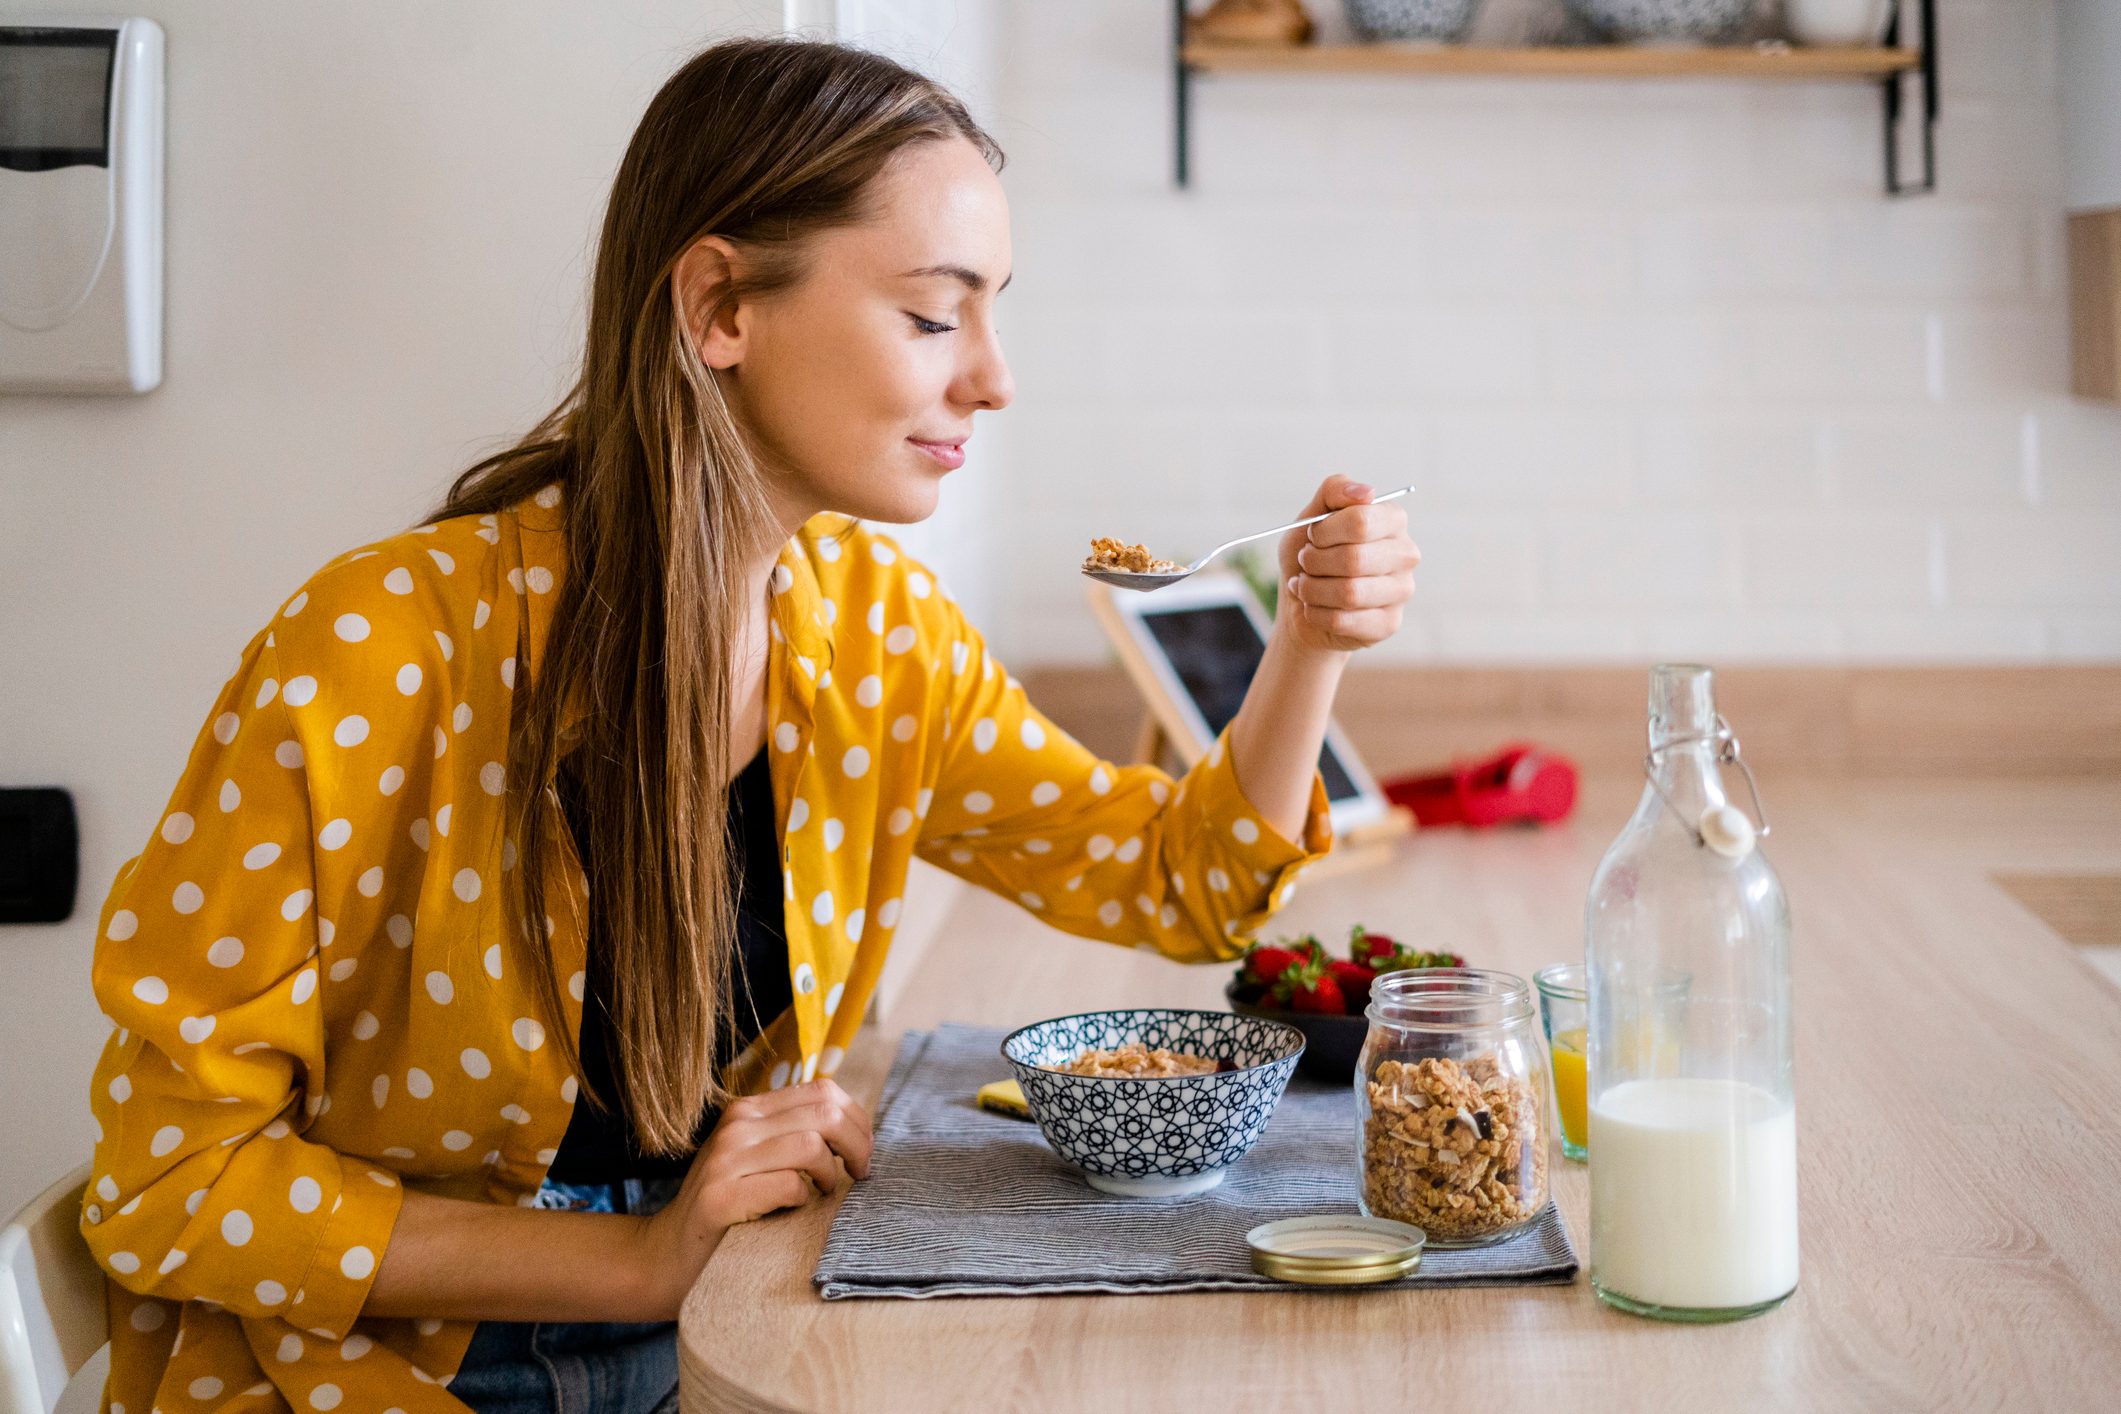 Young woman enjoying breakfast in kitchen at the kitchen table, eating a bowl of cereal on a placemat with a bottle of milk next to it